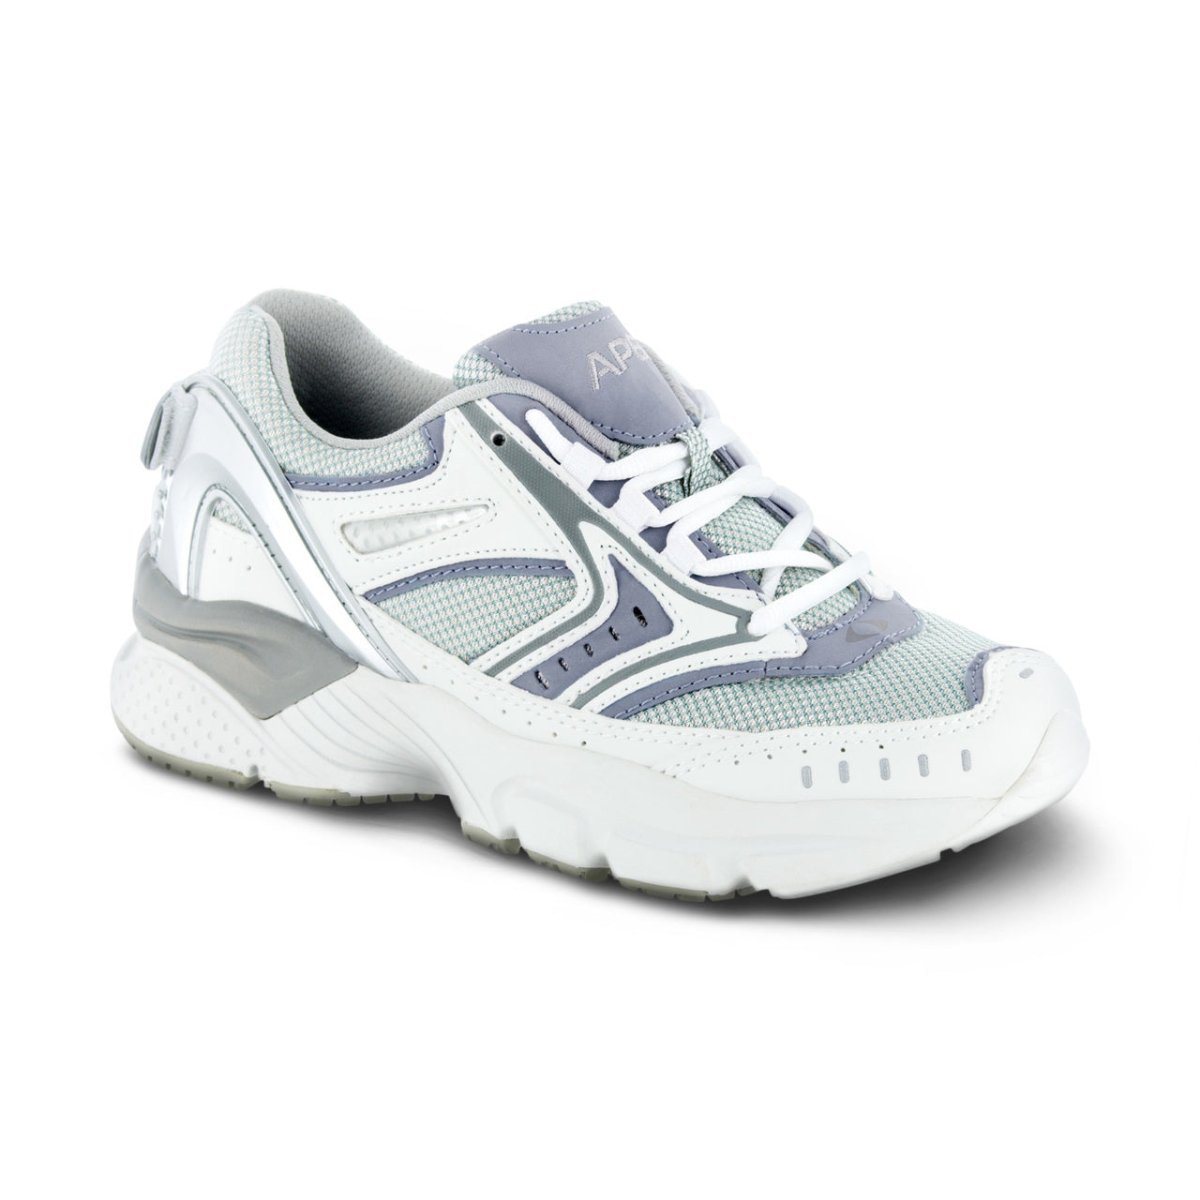 APEX X532W REINA RUNNER WOMEN'S ACTIVE SHOE IN SILVER. - TLW Shoes